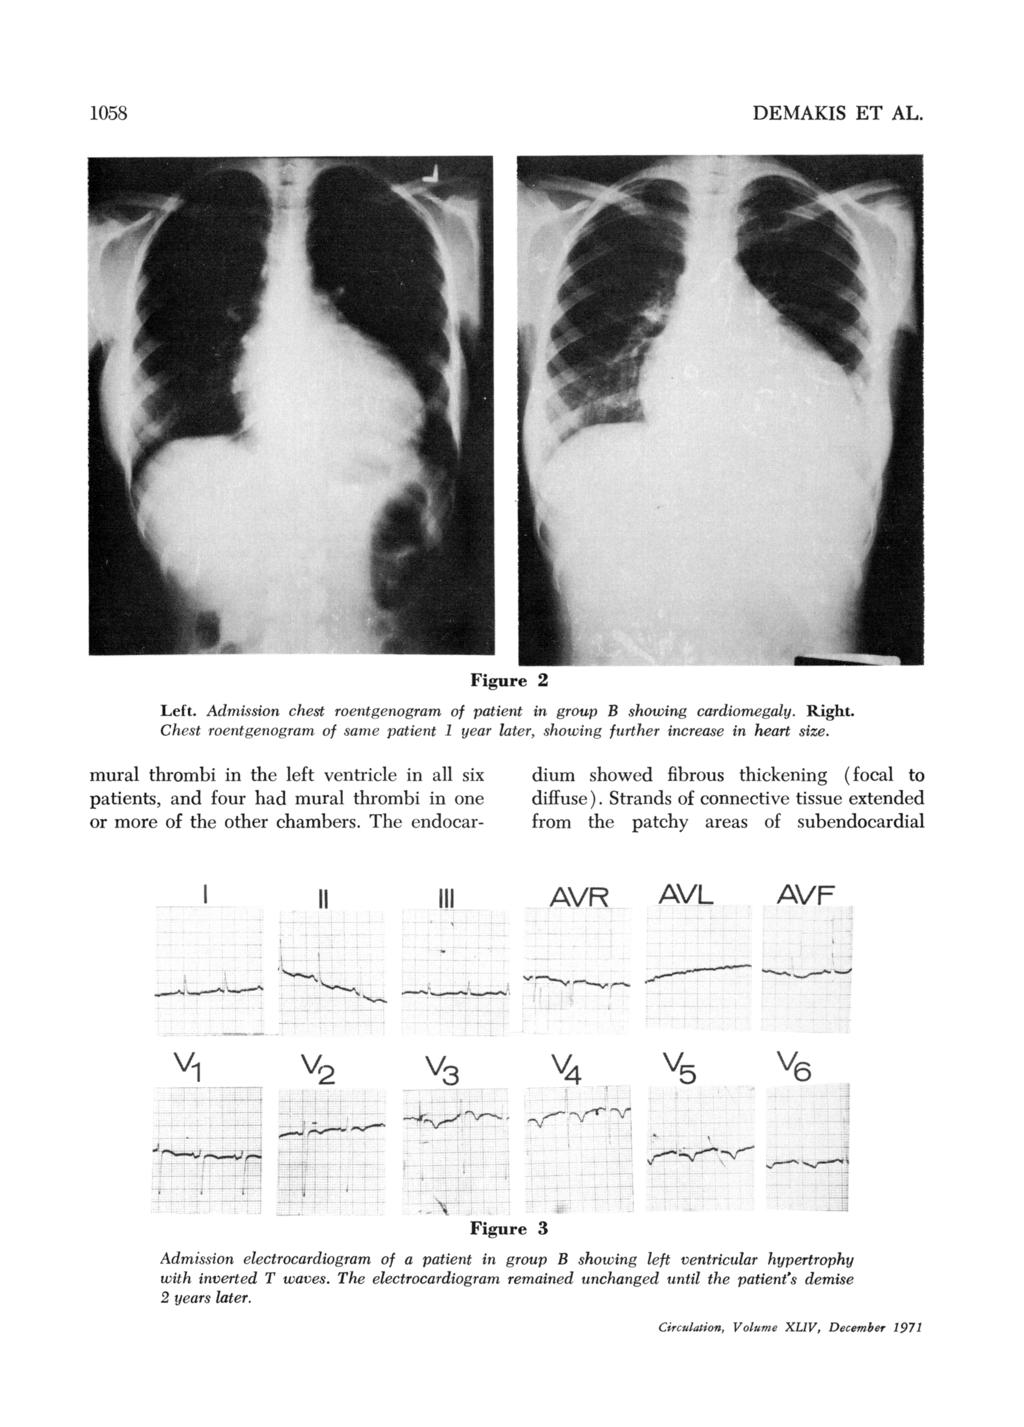 DEMAKIS ET AL. 58. Figure 2 Left. Admission chest roentgenogram of patient in group B showing cardiomegaly. Right.